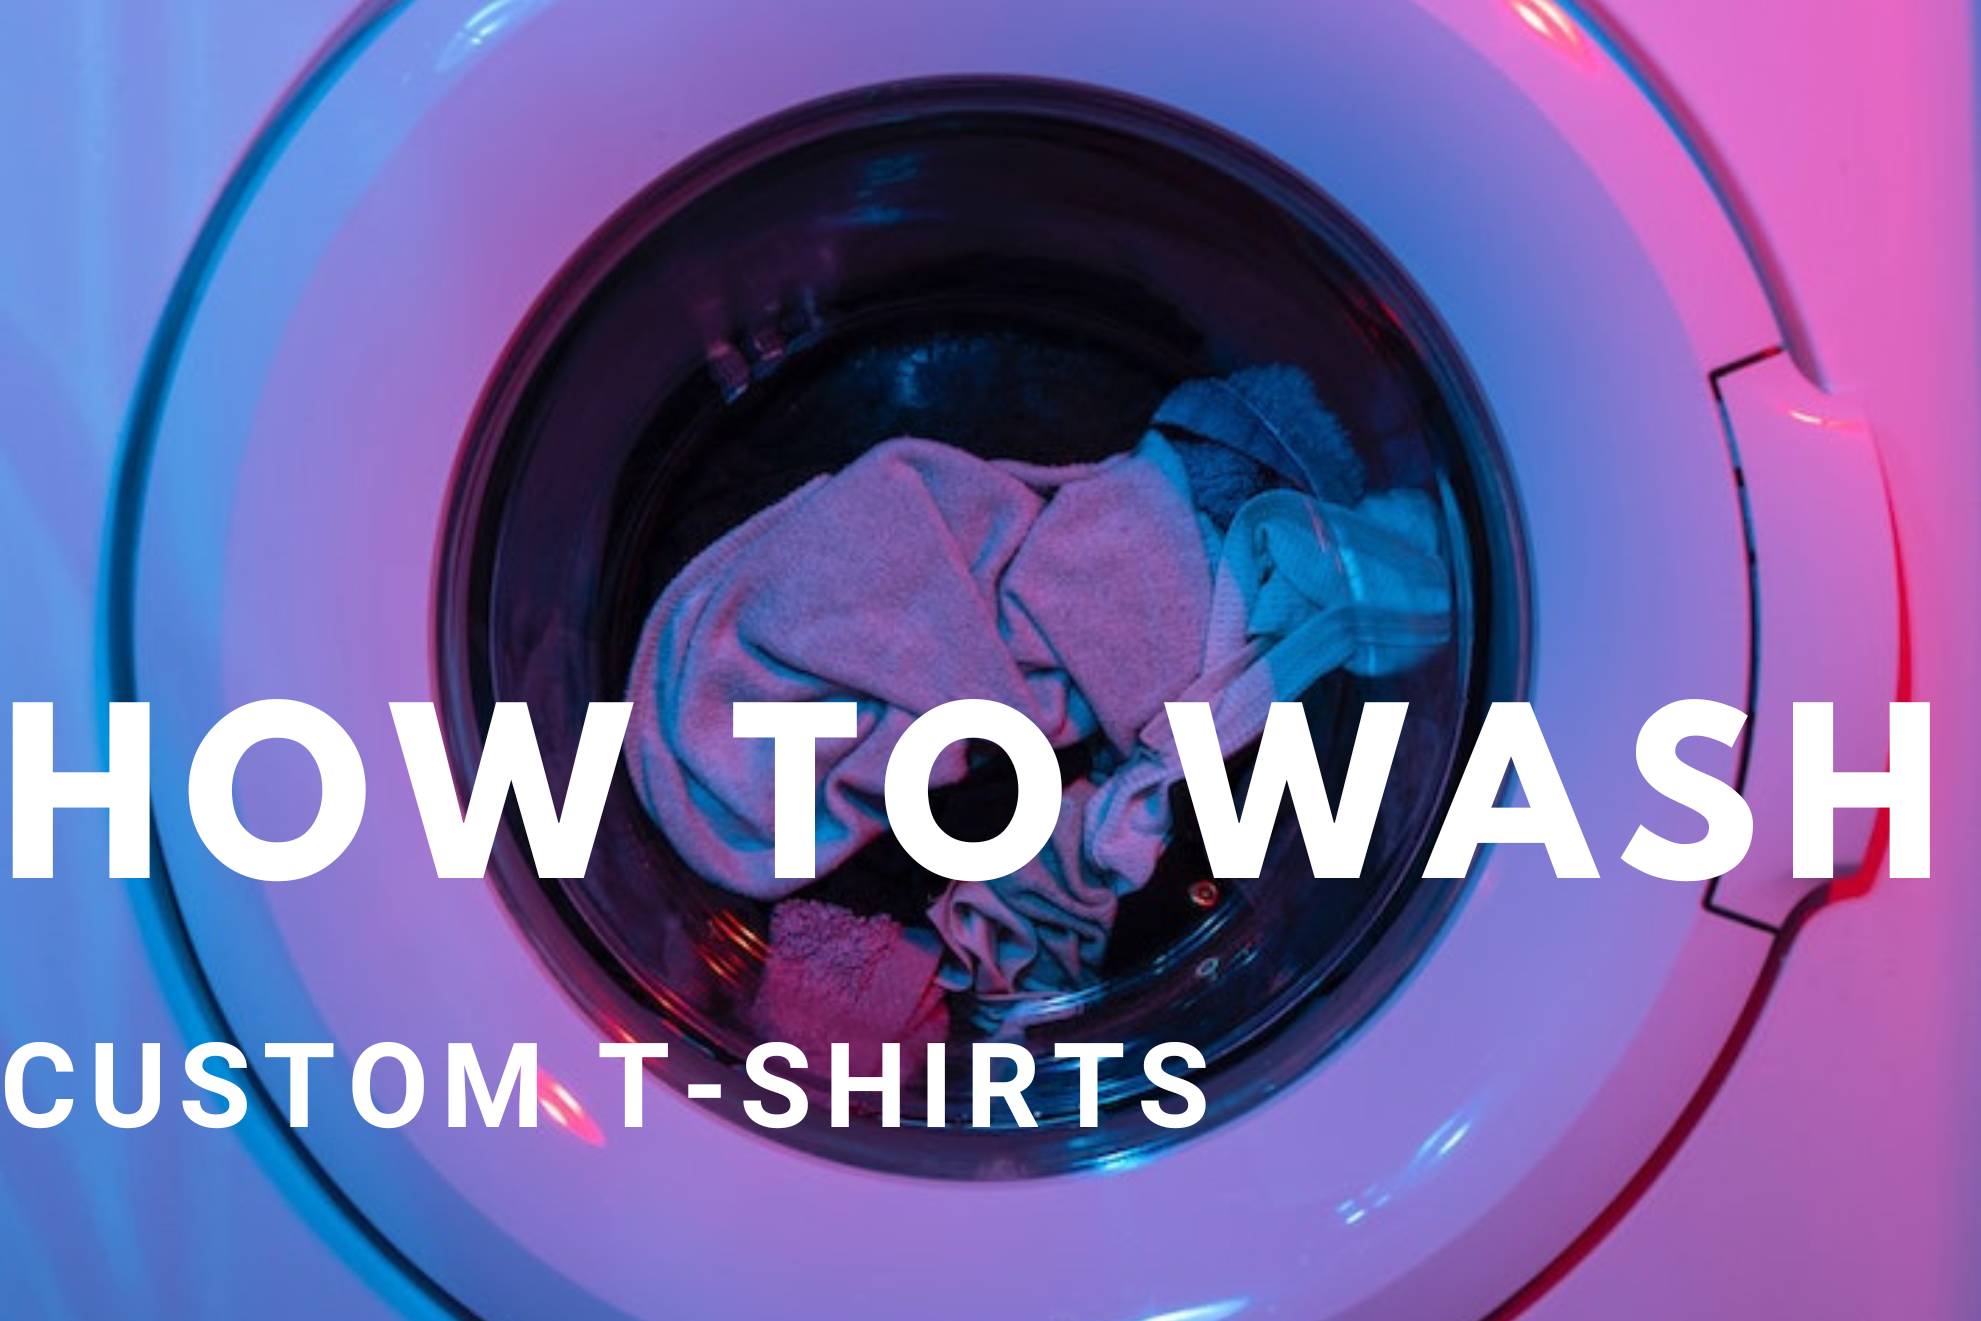 How to Wash Customised T-shirts